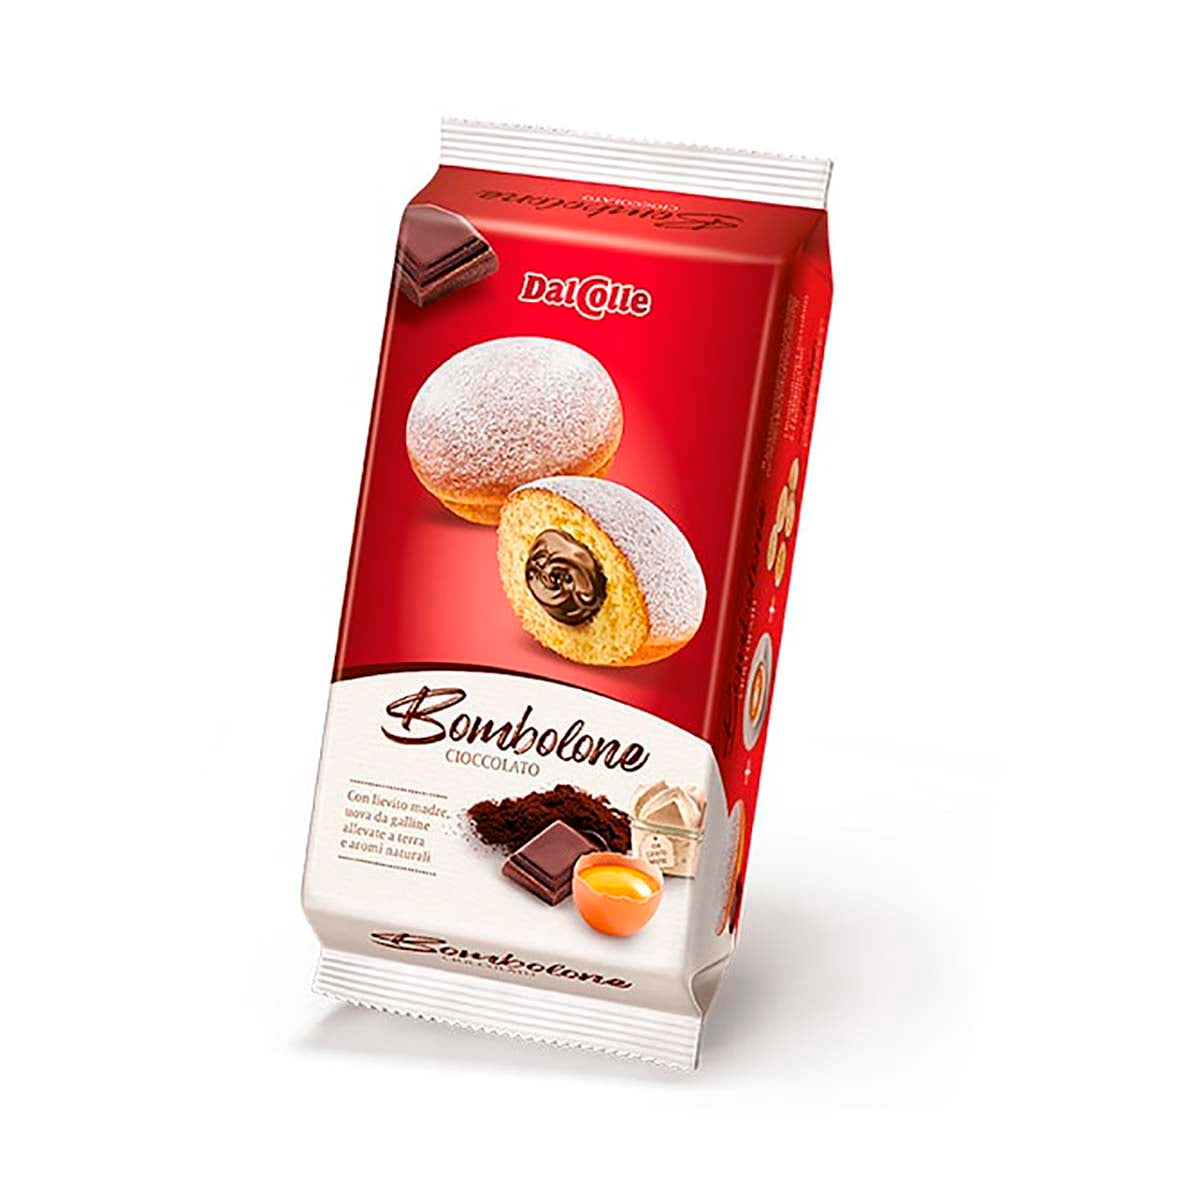 Italian Donuts Bomboloni with Chocolate Cream by Dal Colle, 7.4 oz